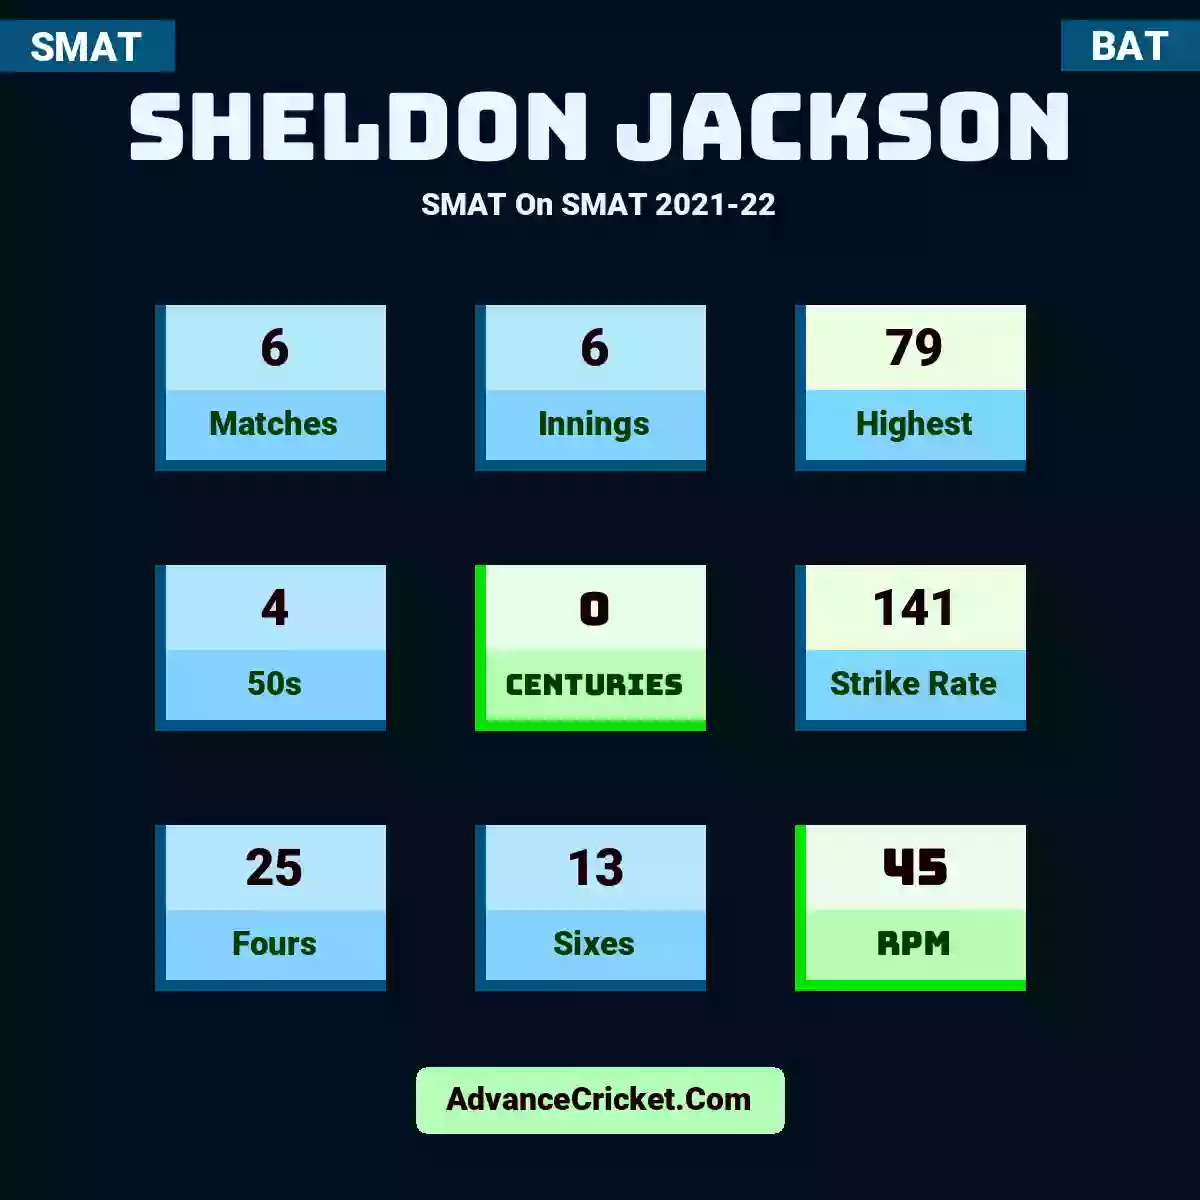 Sheldon Jackson SMAT  On SMAT 2021-22, Sheldon Jackson played 6 matches, scored 79 runs as highest, 4 half-centuries, and 0 centuries, with a strike rate of 141. S.Jackson hit 25 fours and 13 sixes, with an RPM of 45.